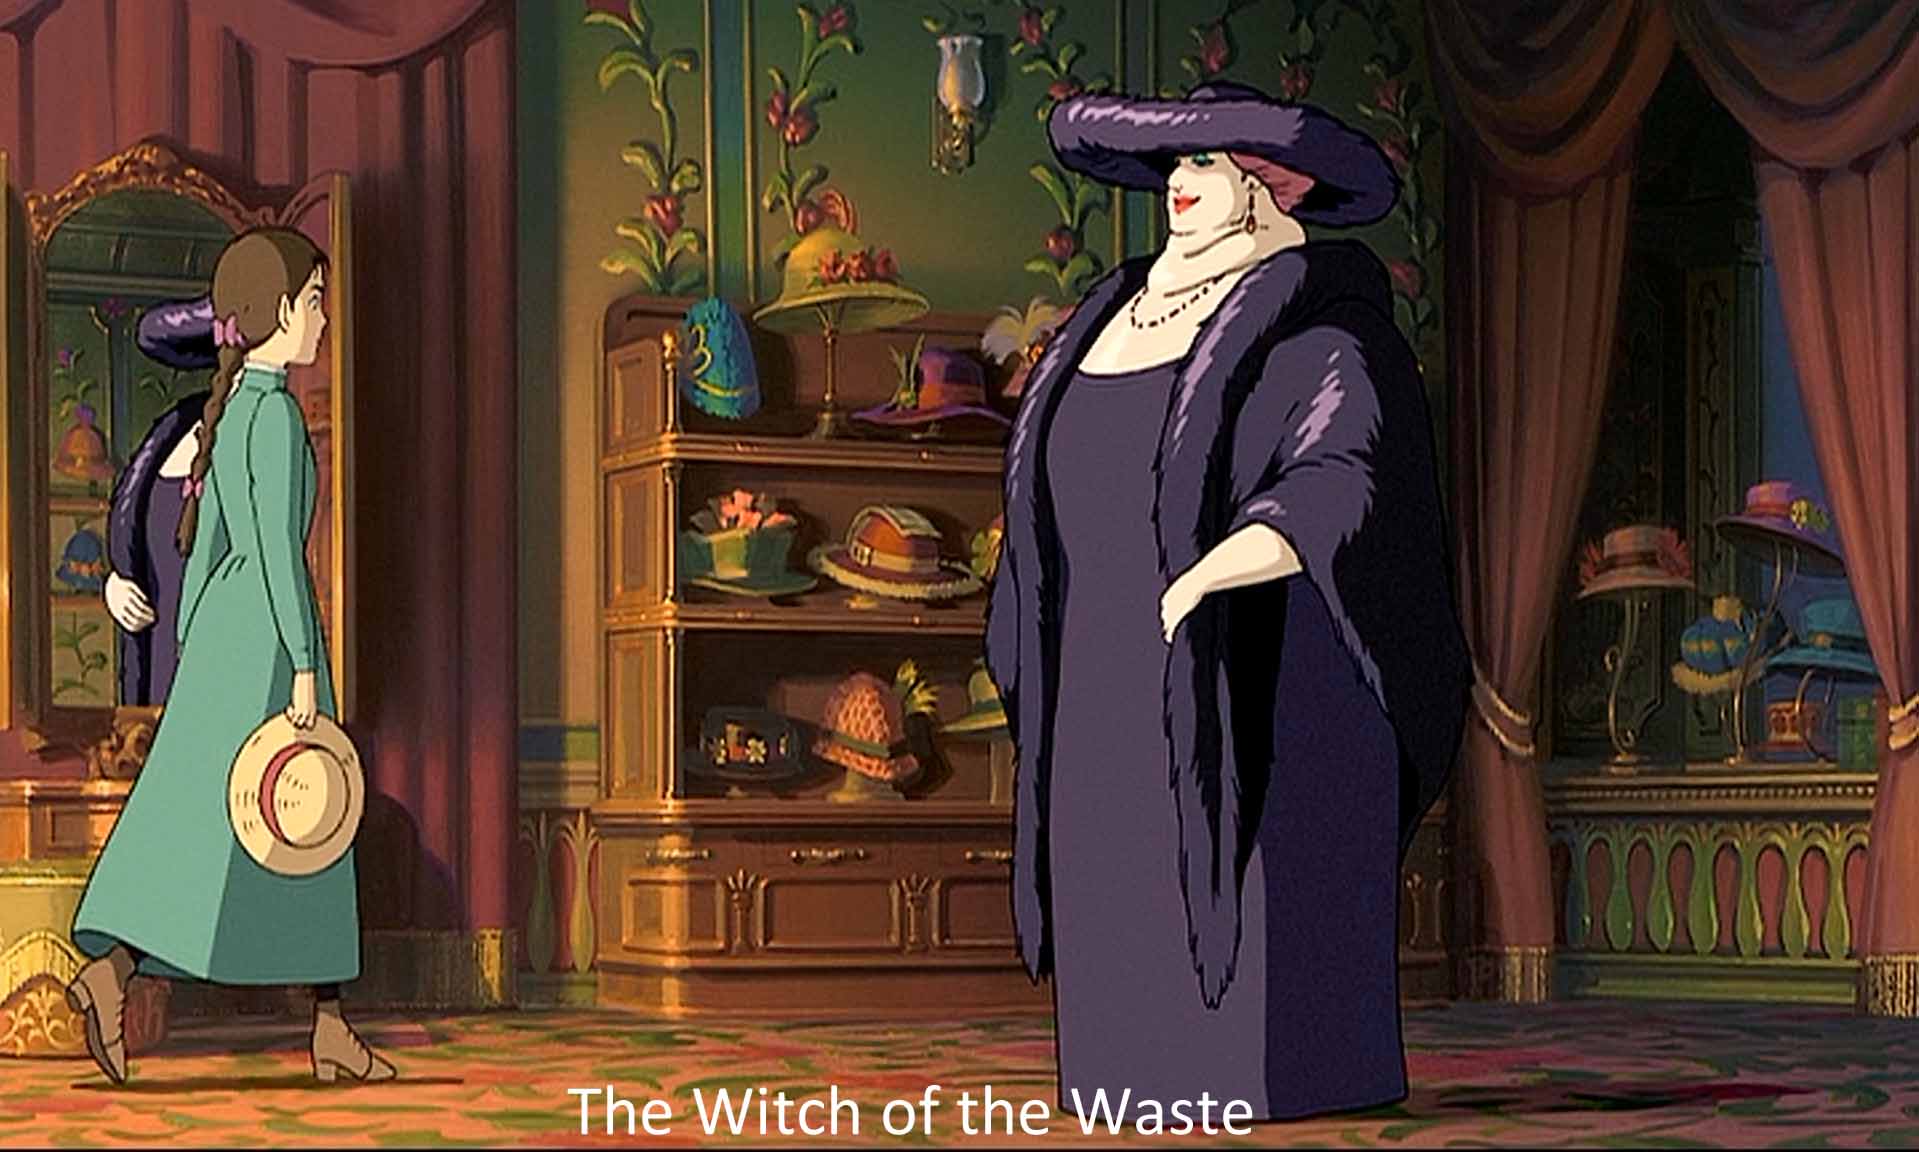 The Witch of the Waste